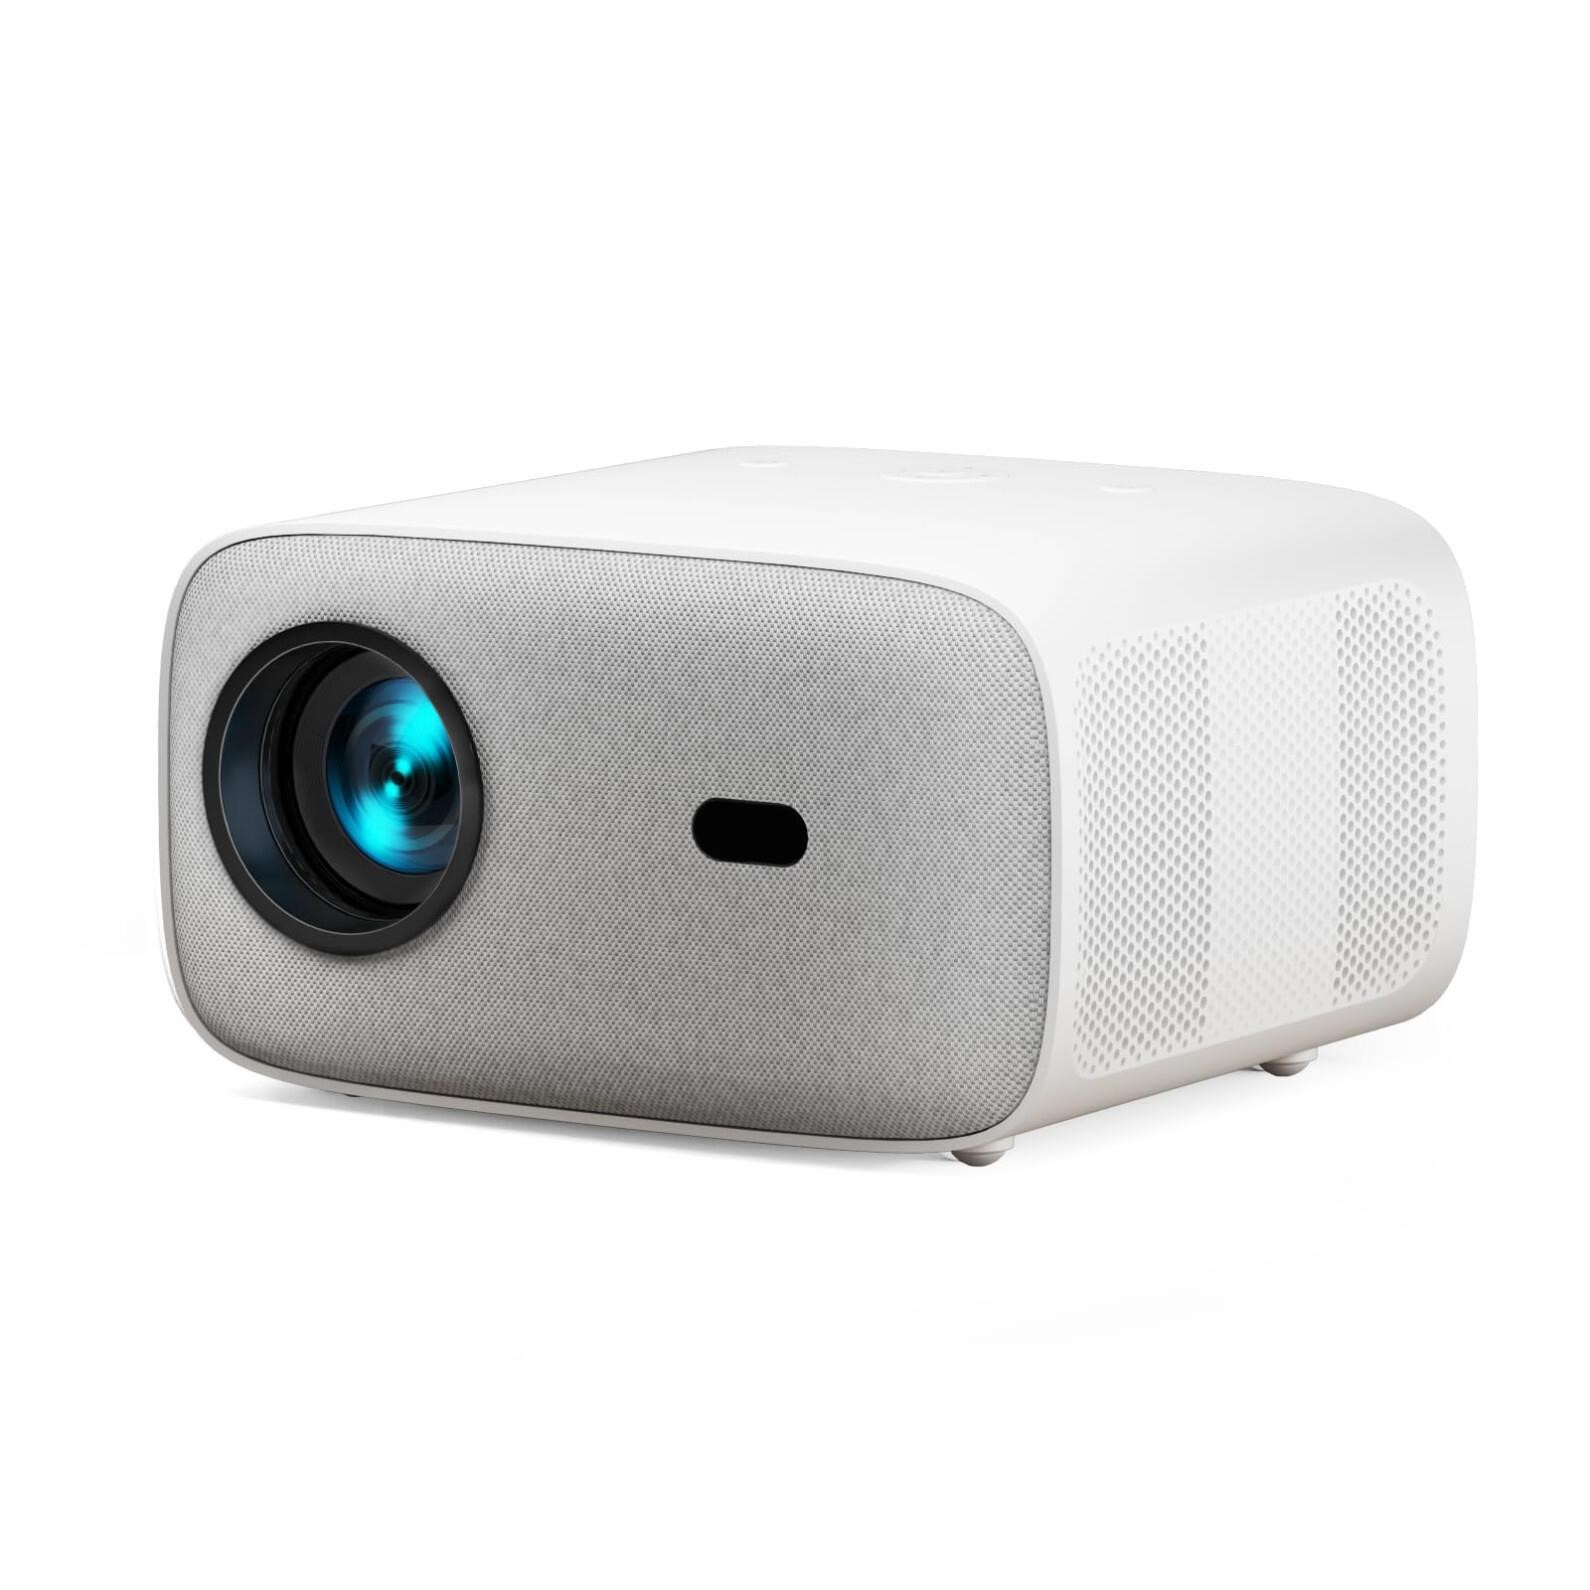 Native 1080P Projector with WiFi and Dual Bluetoot